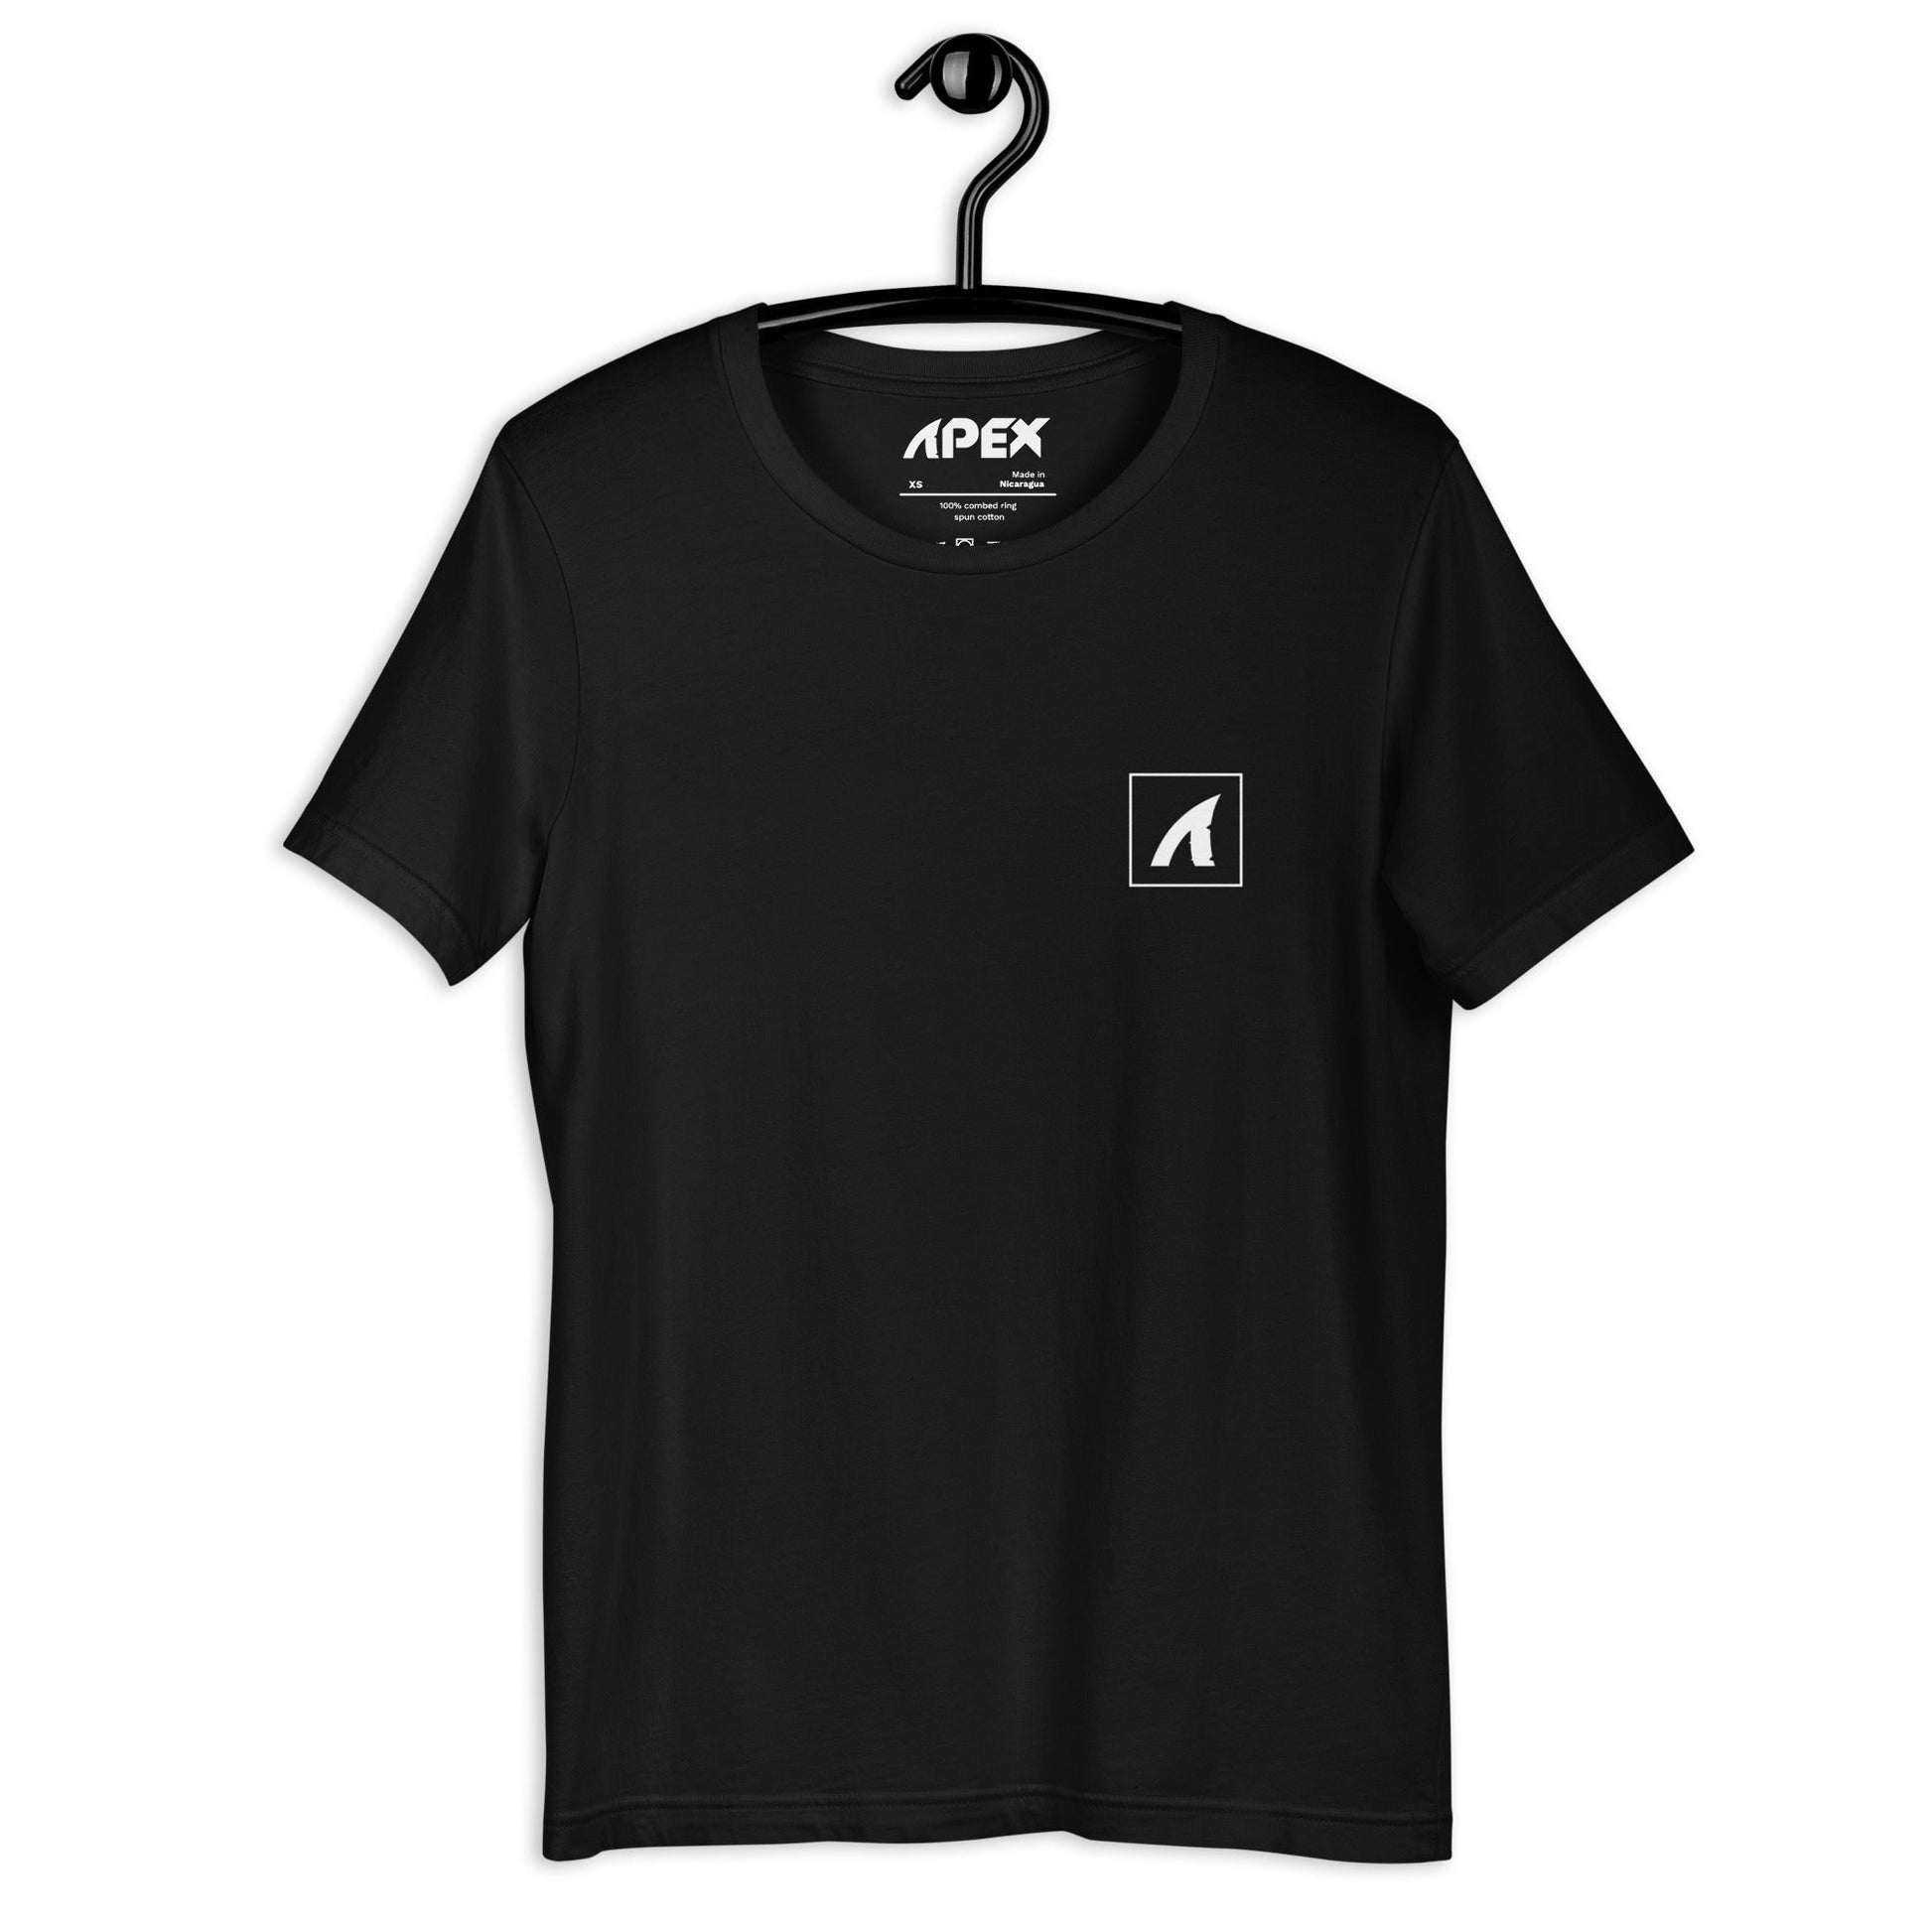 BE A SHARK - Premium  from APEX USA - Just $32! Shop now at APEX USA